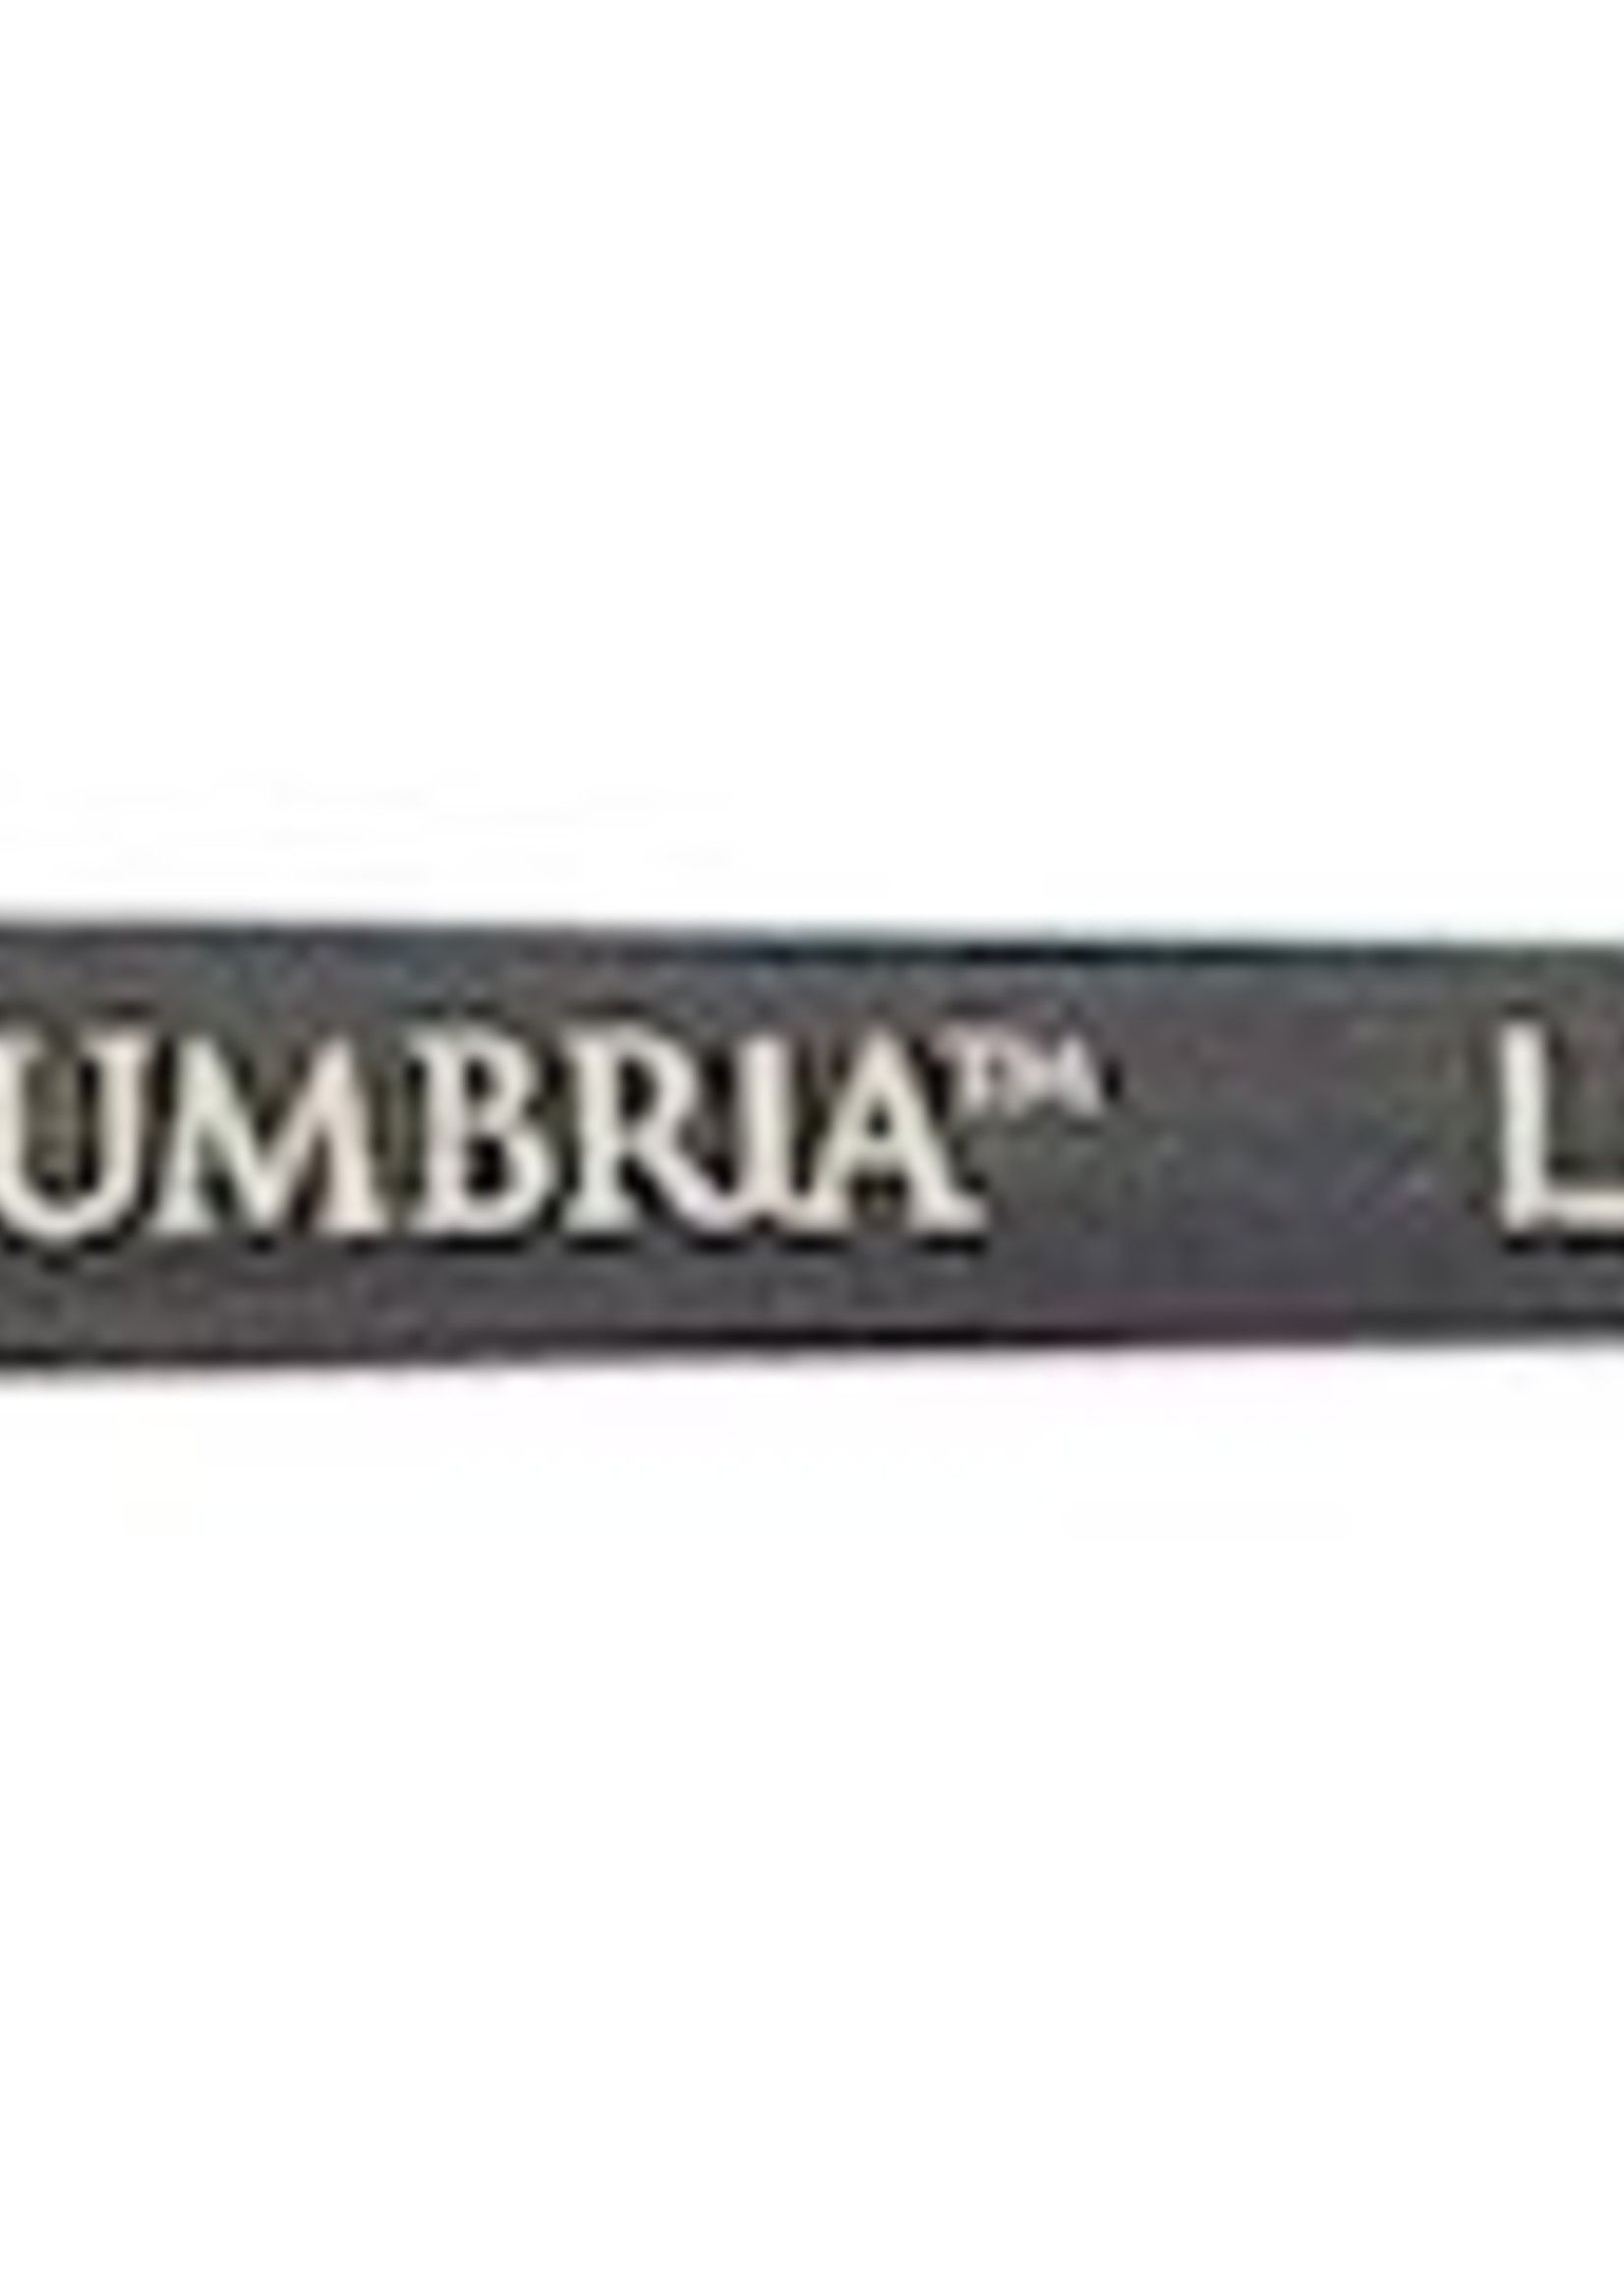 PRINCETON PRINCETON UMBRIA BRUSH SERIES 6250 SPECIAL SYNTHETIC SH LINER 4